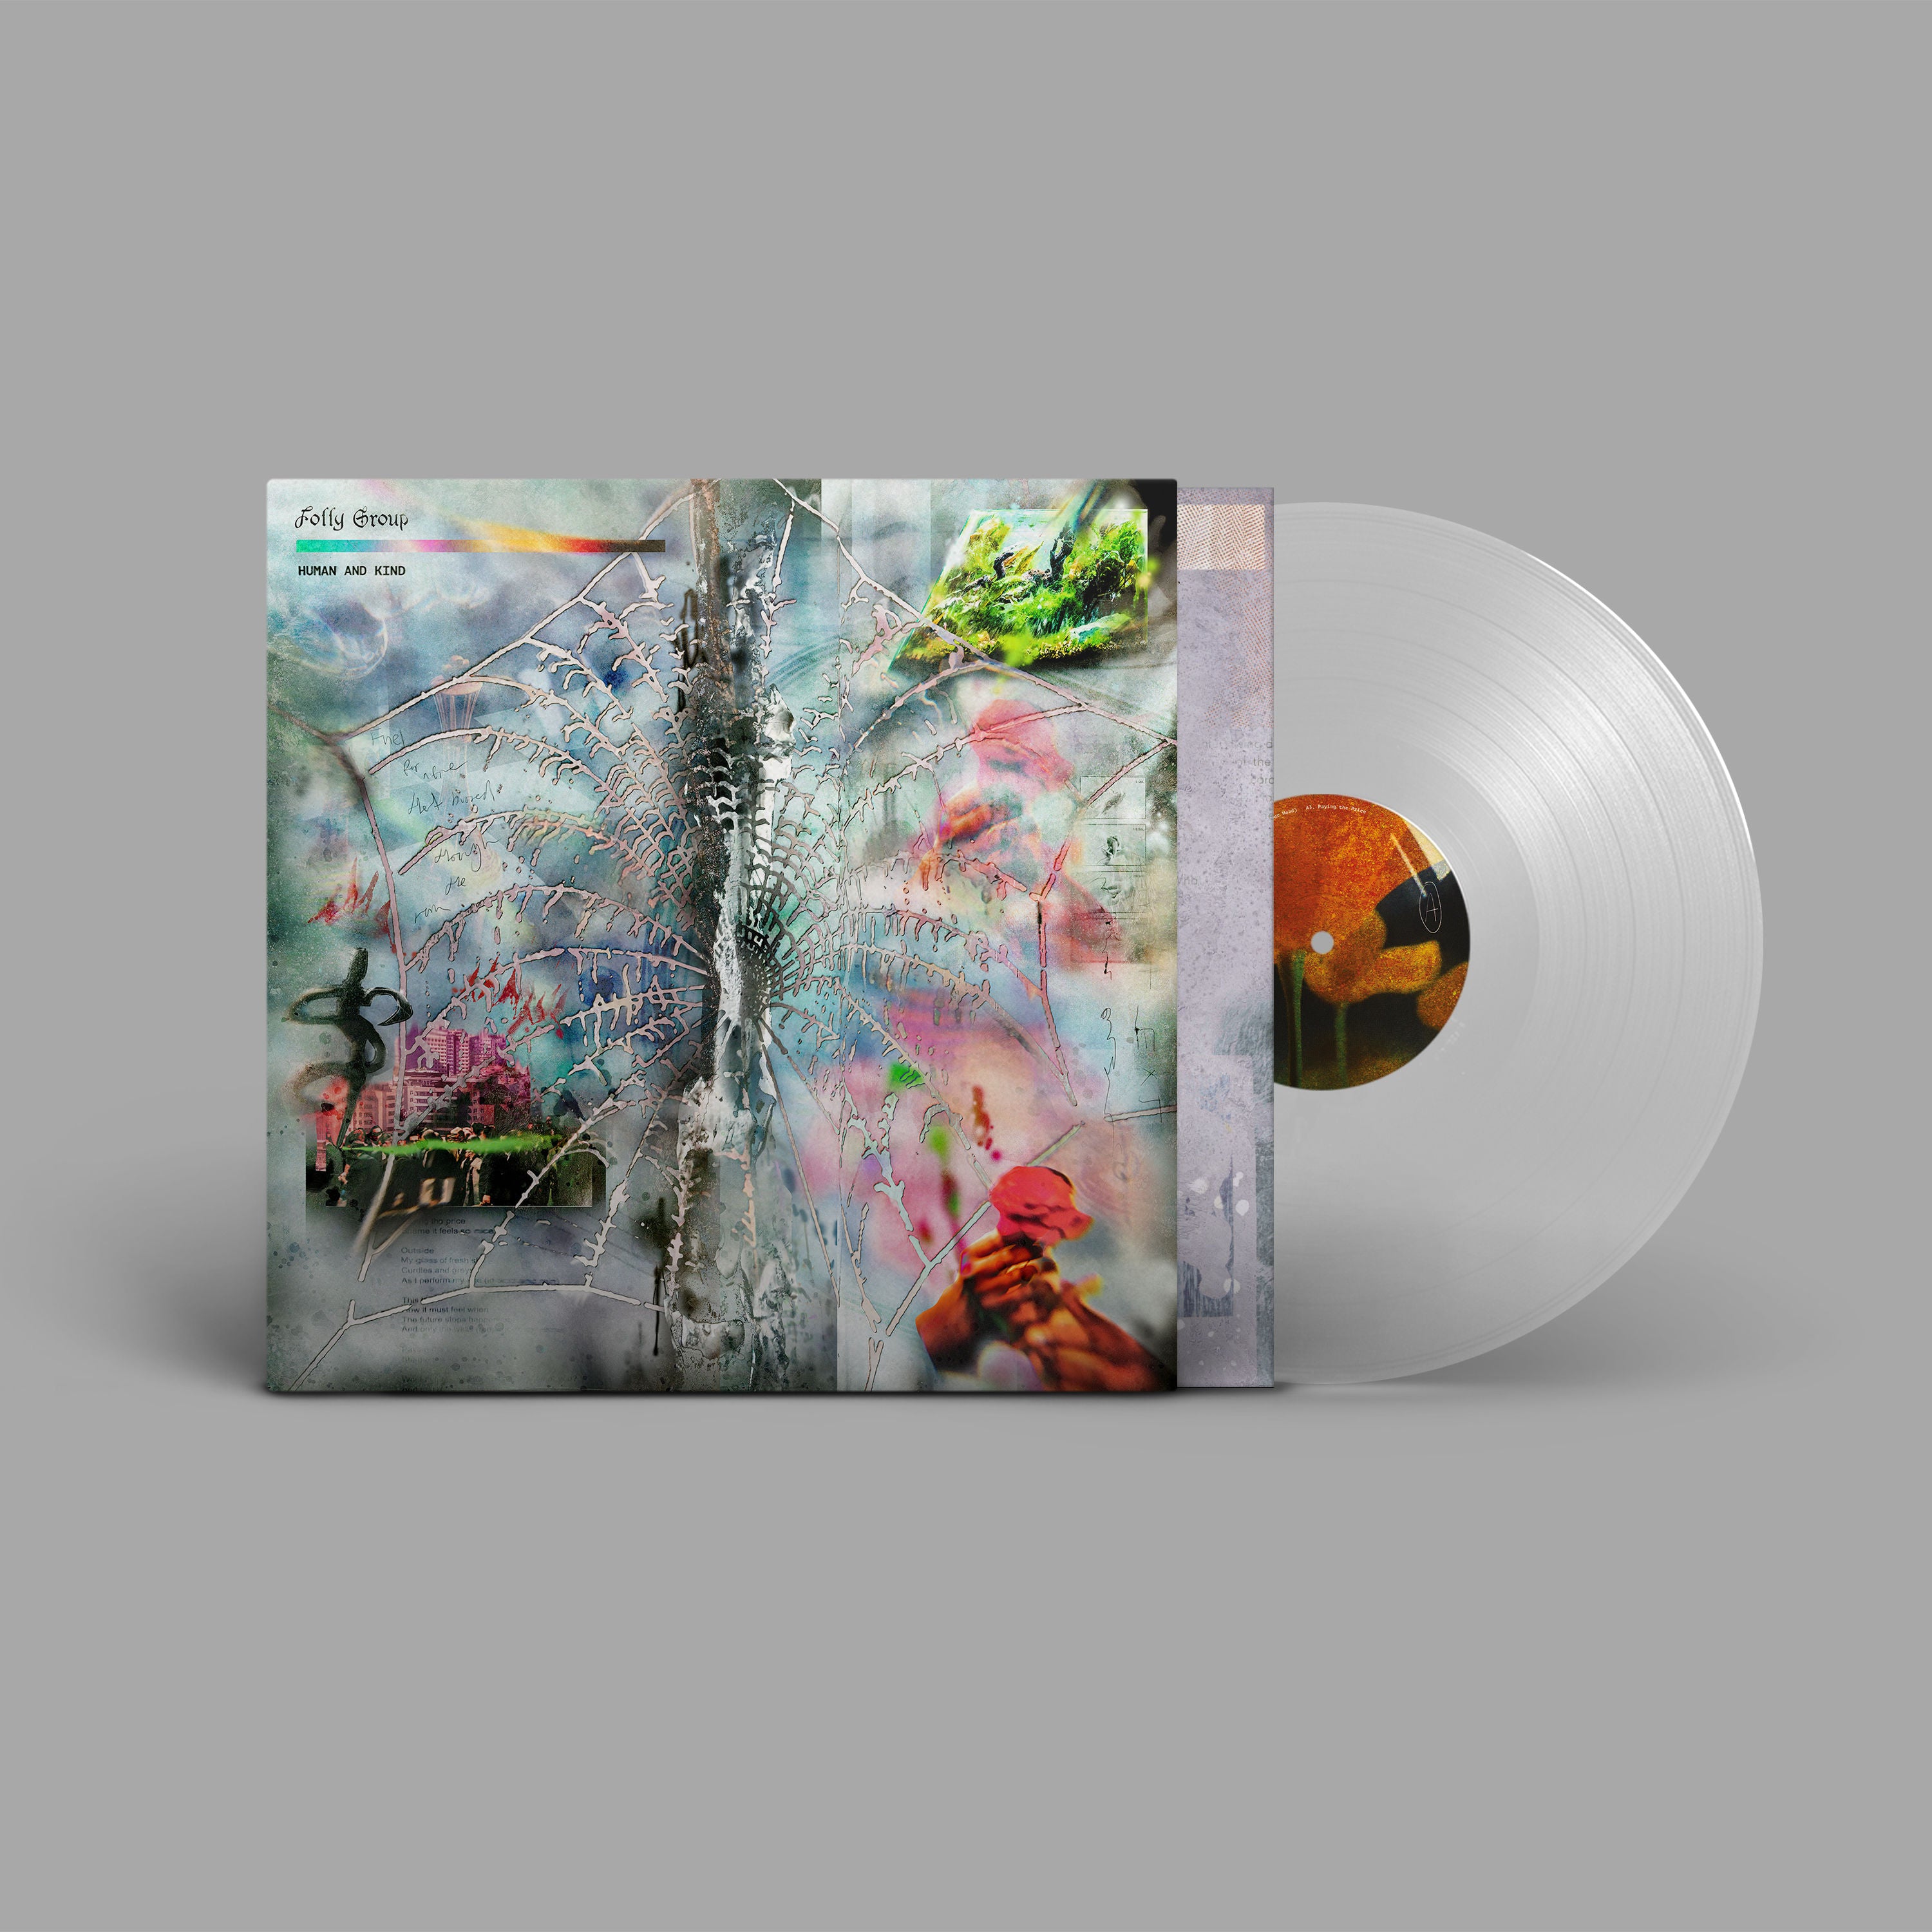 Human And Kind: Limited Crystal Clear Vinyl LP